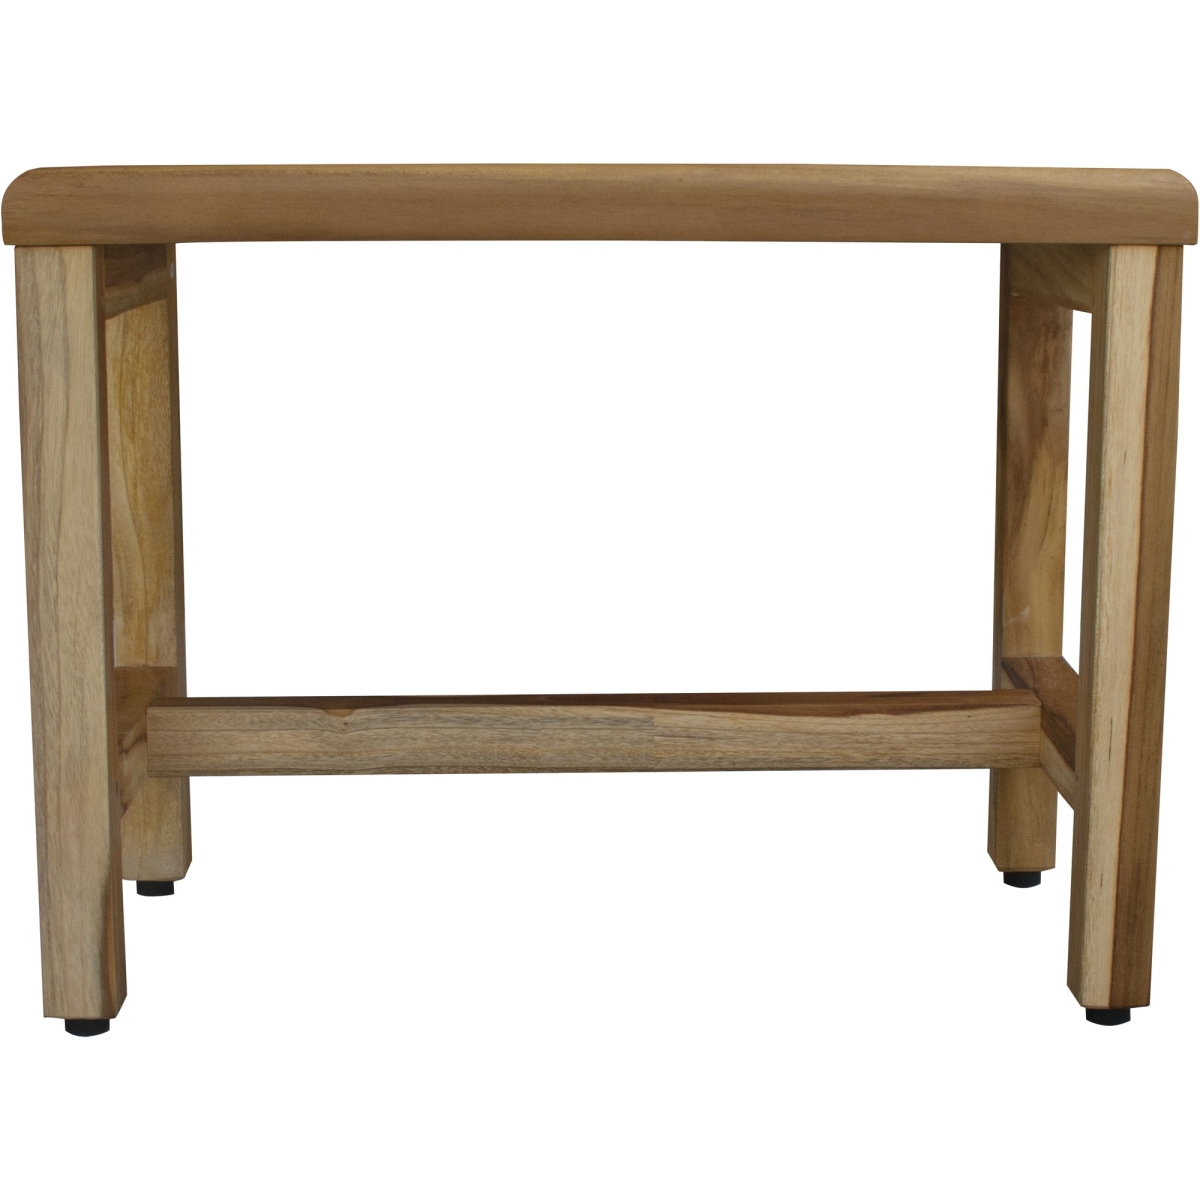 Picture of HomeRoots Furniture 376748 Compact Rectangular Teak Shower Outdoor Bench with Shelf - Natural Finish - 18 x 14 x 24 in.